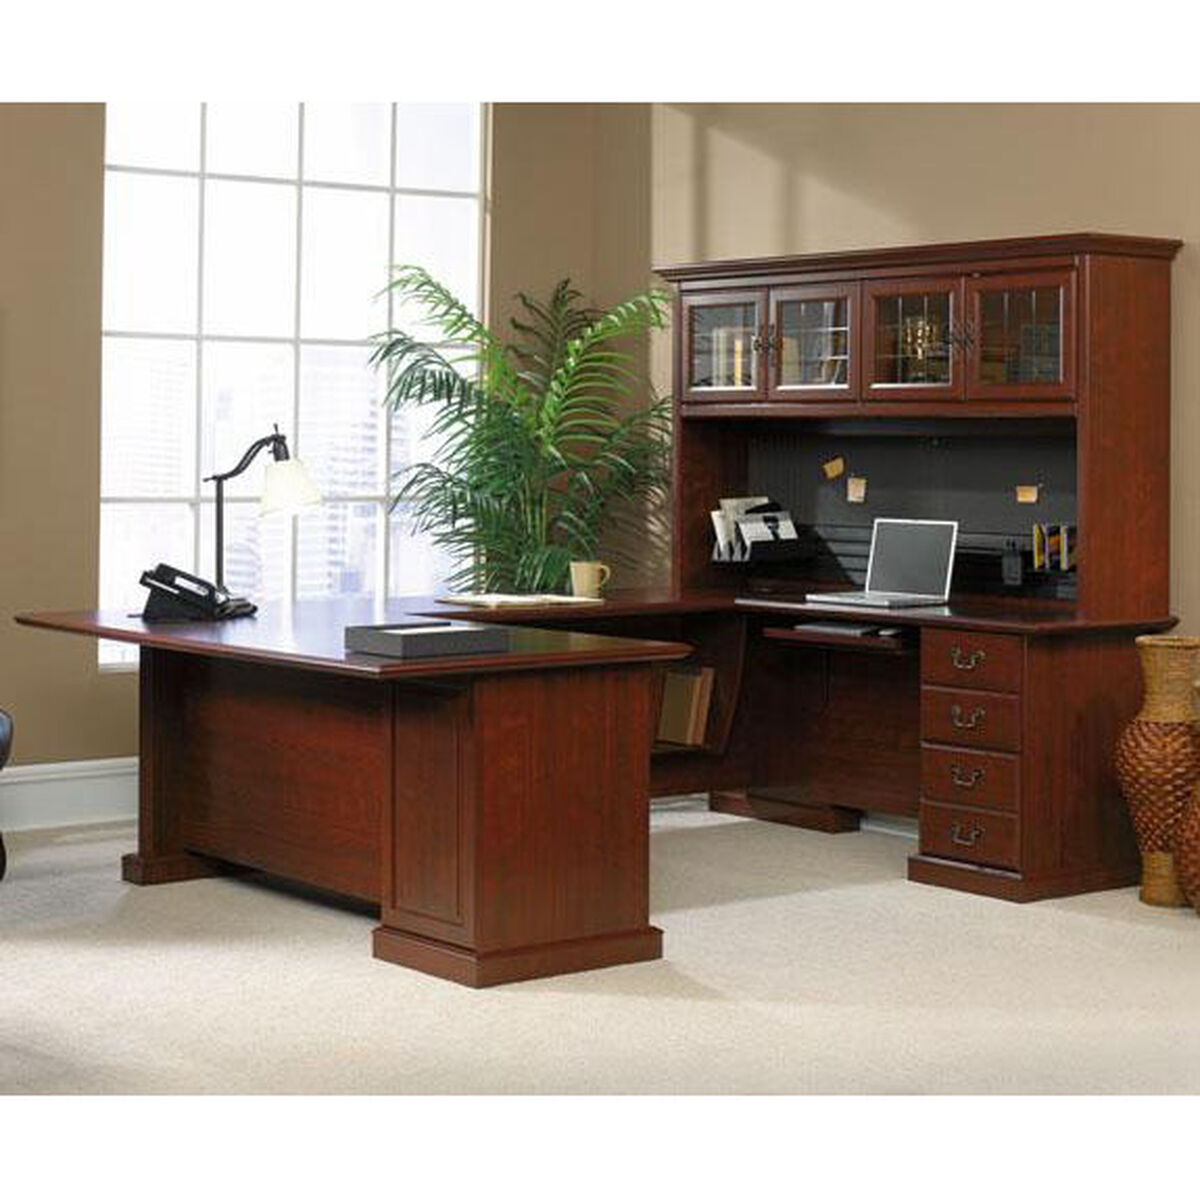 Home office furniture sets 16